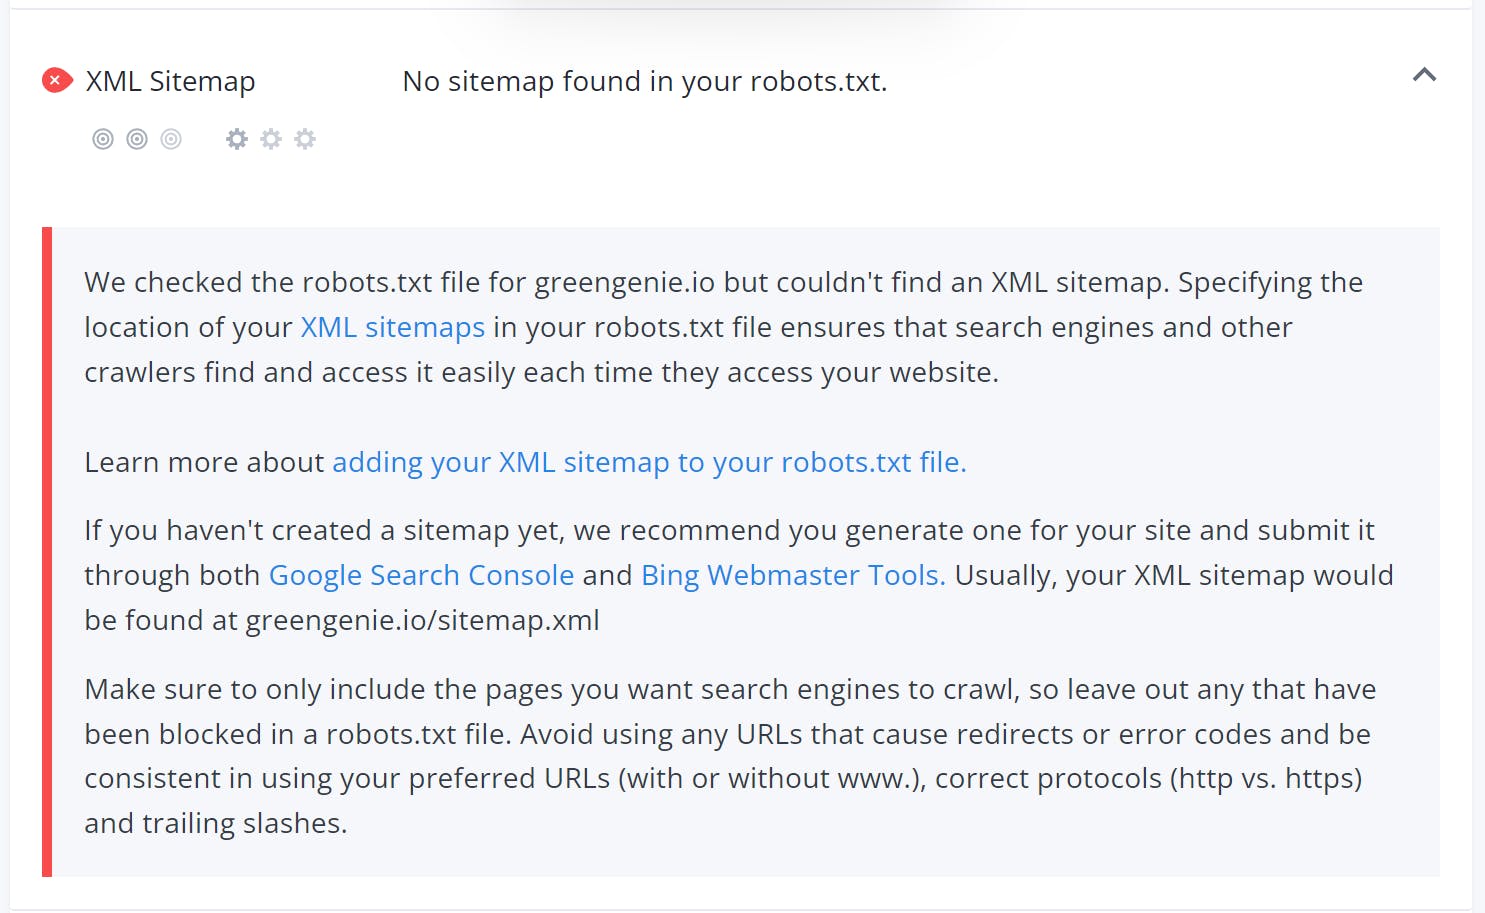 XML Sitemap - No sitemap found in your robots.txt
We checked the robots.txt file for greengenie.io but couldn't find an XML sitemap. Specifying the location of your XML sitemaps in your robots.txt file ensures that search engines and other crawlers find and access it easily each time they access your website.
Learn more about adding your XML sitemap to your robots.txt file.
If you haven't created a sitemap yet, we recommend you generate one for your site and submit it through both Google Search Console and Bing Webmaster Tools. Usually, your XML sitemap would be found at greengenie.io/sitemap.xml
Make sure to only include the pages you want search engines to crawl, so leave out any that have been blocked in a robots.txt file. Avoid using any URLs that cause redirects or error codes and be consistent in using your preferred URLs (with or without www.), correct protocols (http vs. https) and trailing slashes.